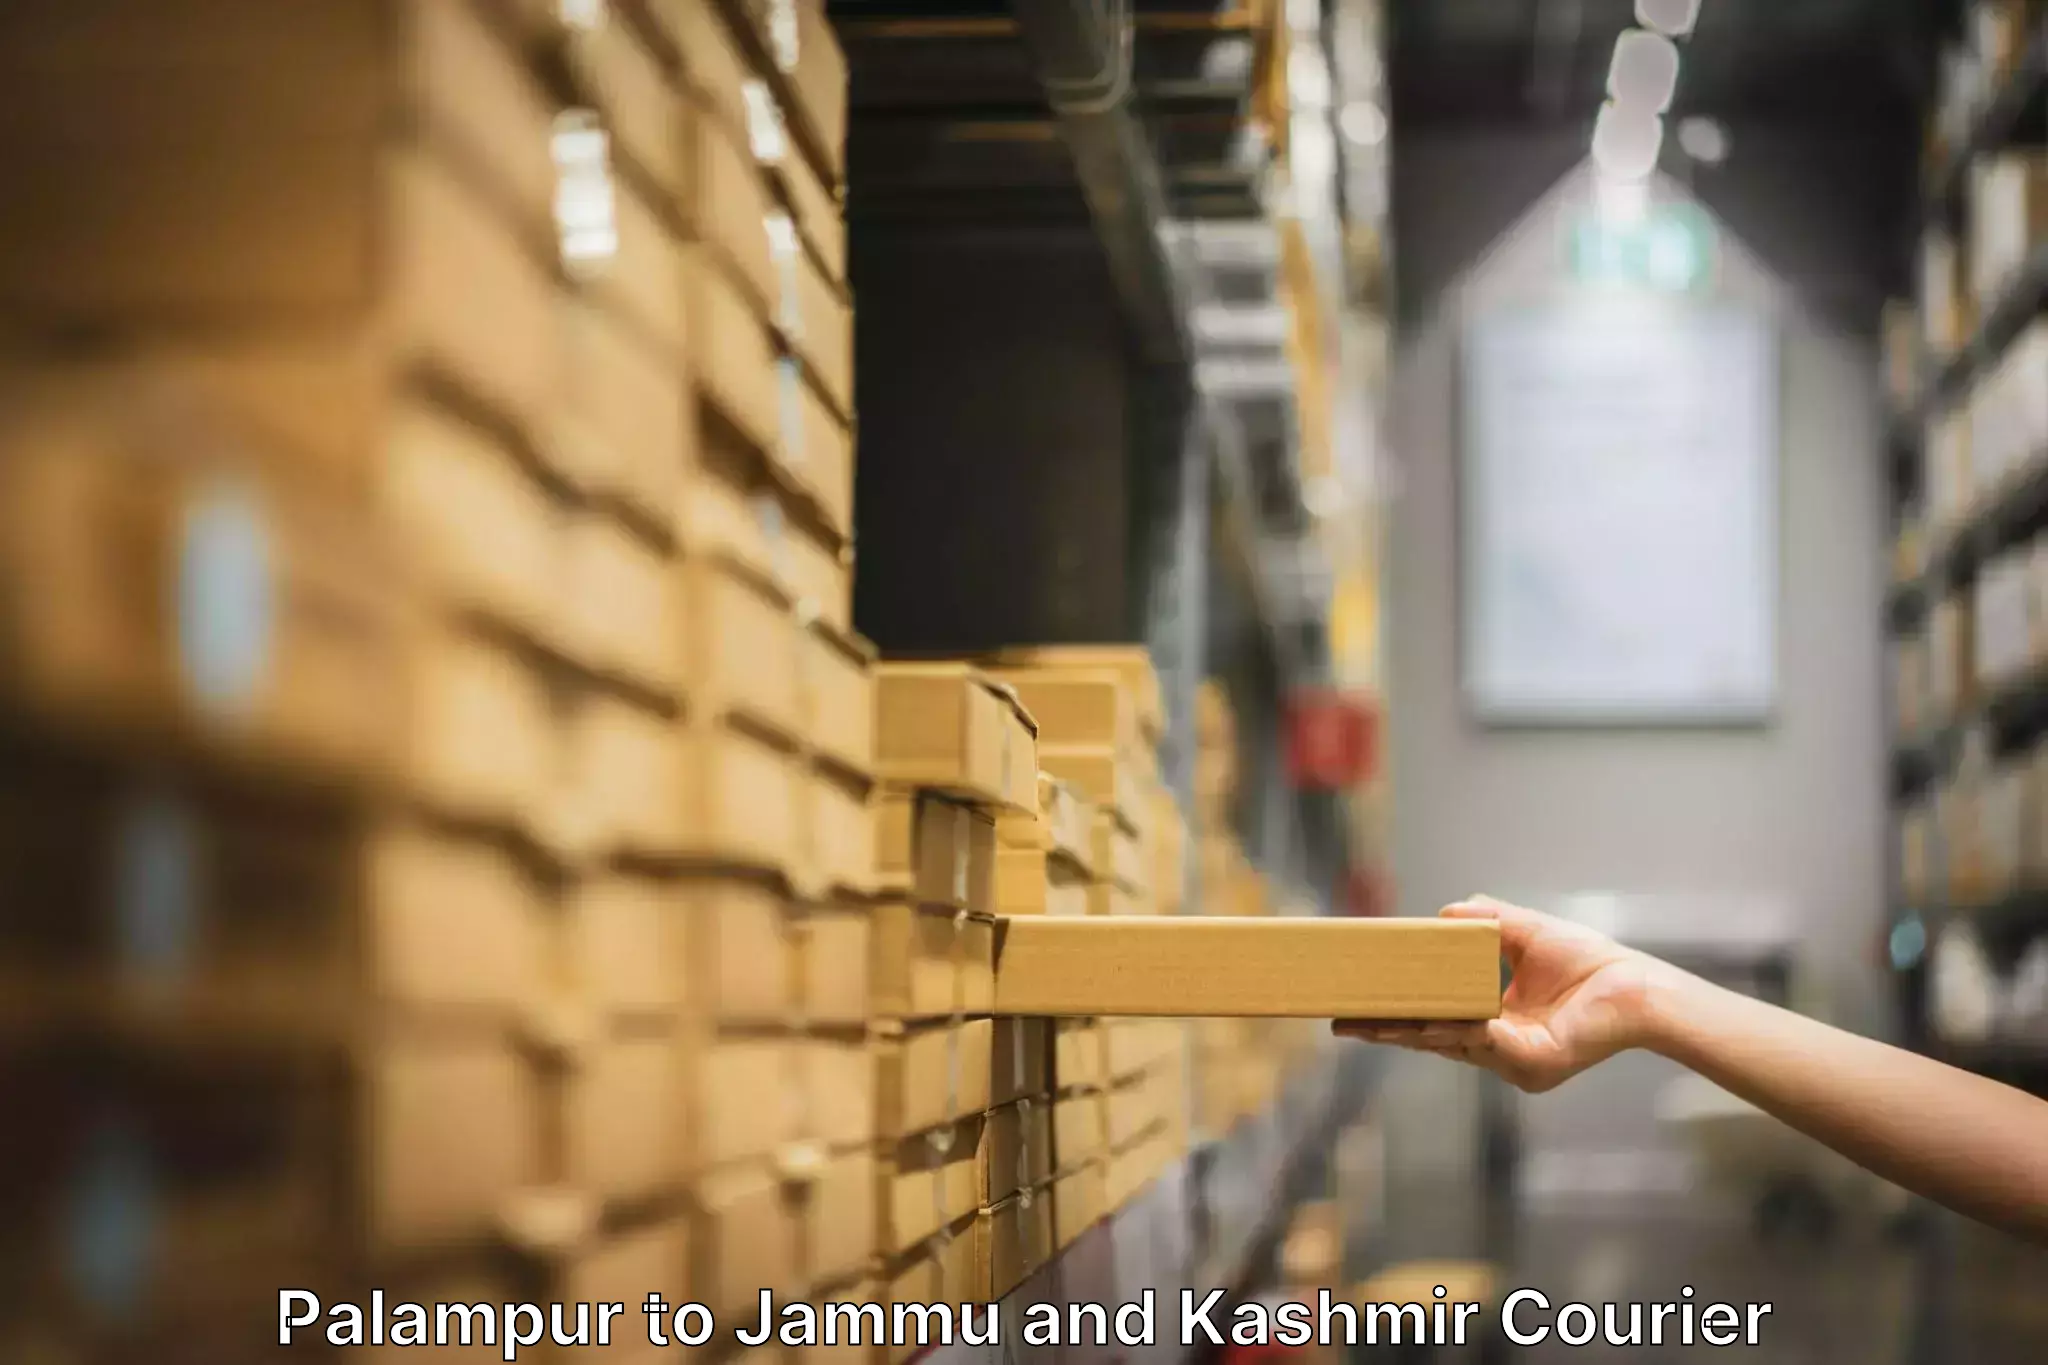 Furniture transport specialists Palampur to Shopian